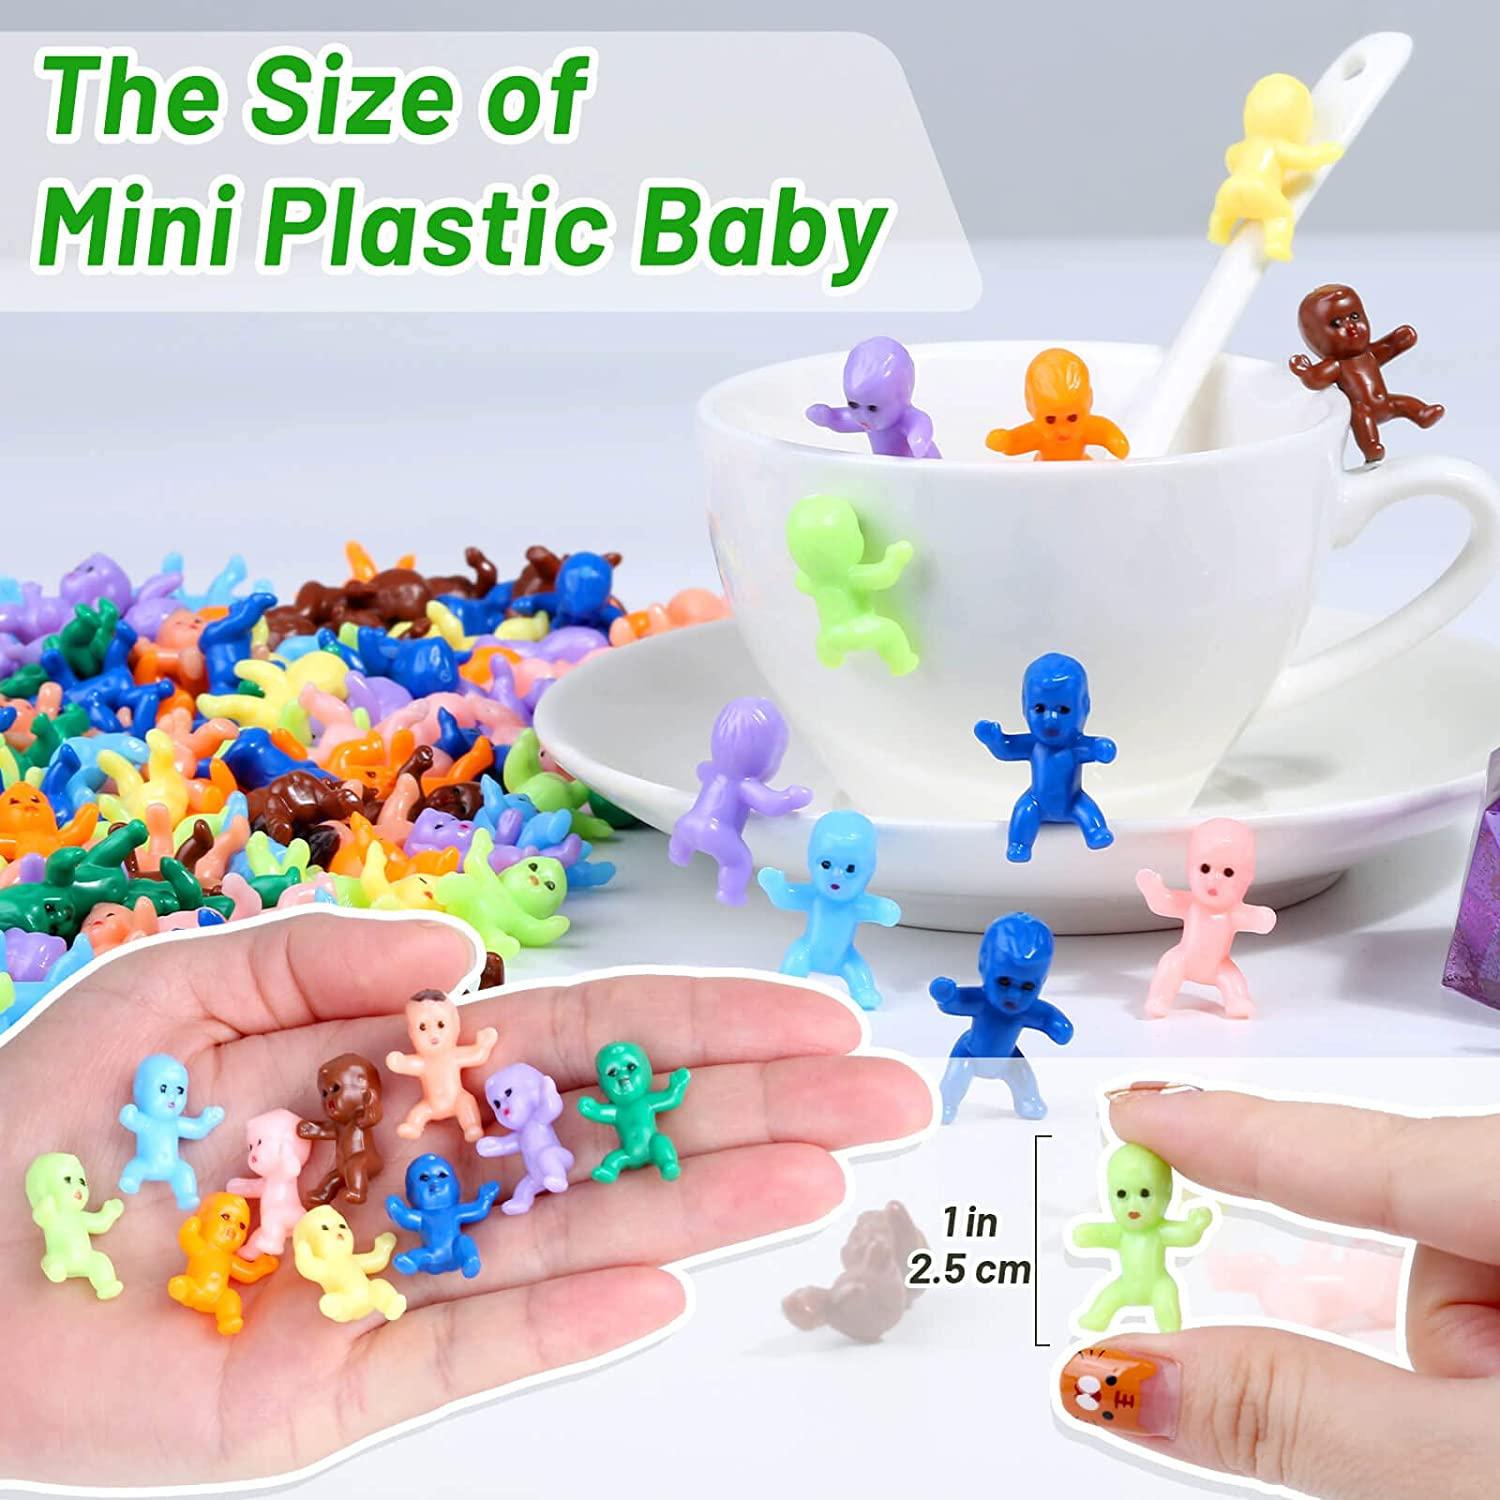  selizo Mini Plastic Babies for Baby Shower, 300pcs Tiny Baby  Figurines Mini Babies Bulk for Ice Cube Babies, Small King Cake Babies, My  Water Broke Baby Shower Games (6 Colors) 